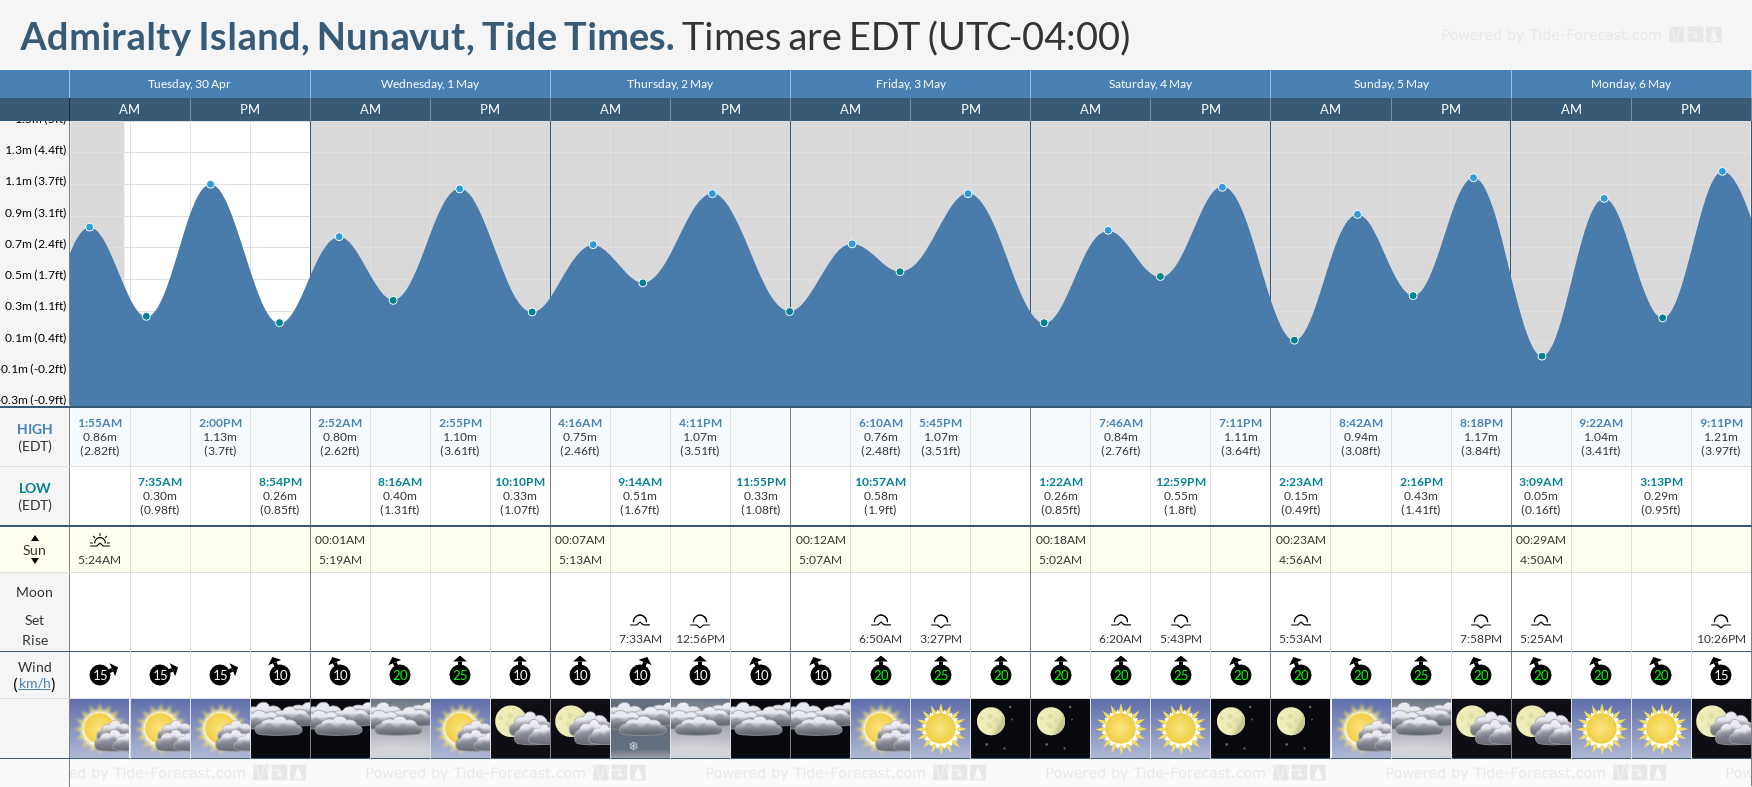 Admiralty Island, Nunavut Tide Chart including high and low tide tide times for the next 7 days